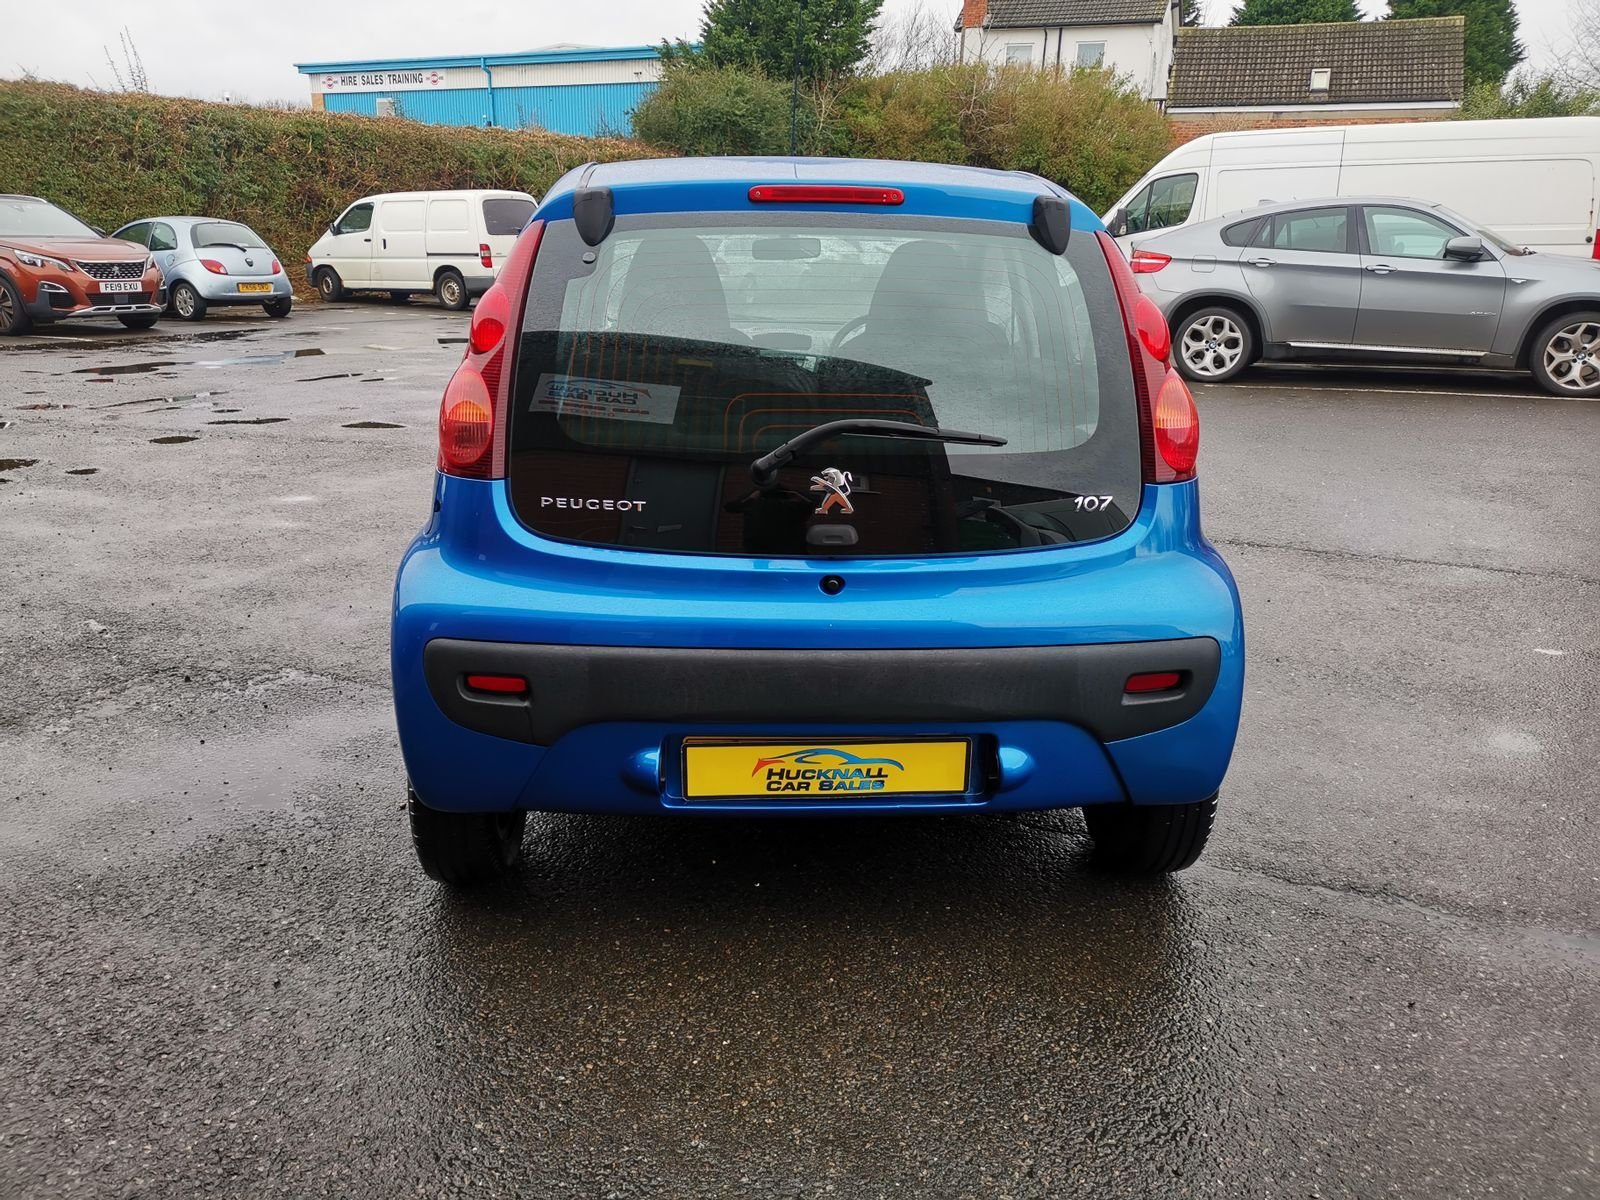 USED Peugeot 107 ACTIVE 2012 5dr Manual (FH12JYE)